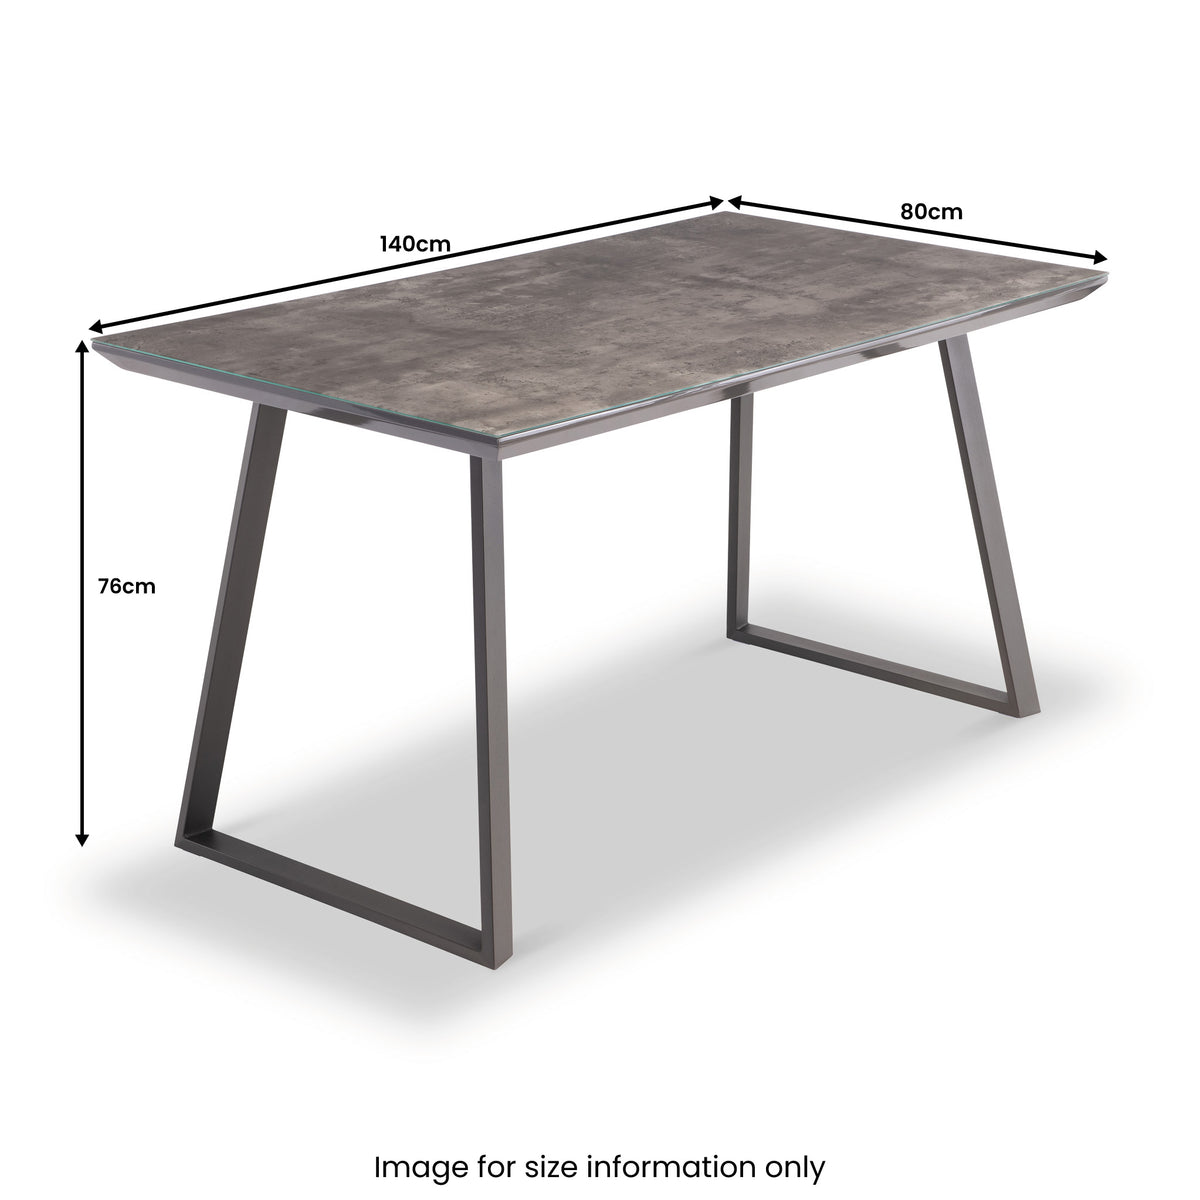 Parker Grey 140cm Rectangular Dining Table with concrete look